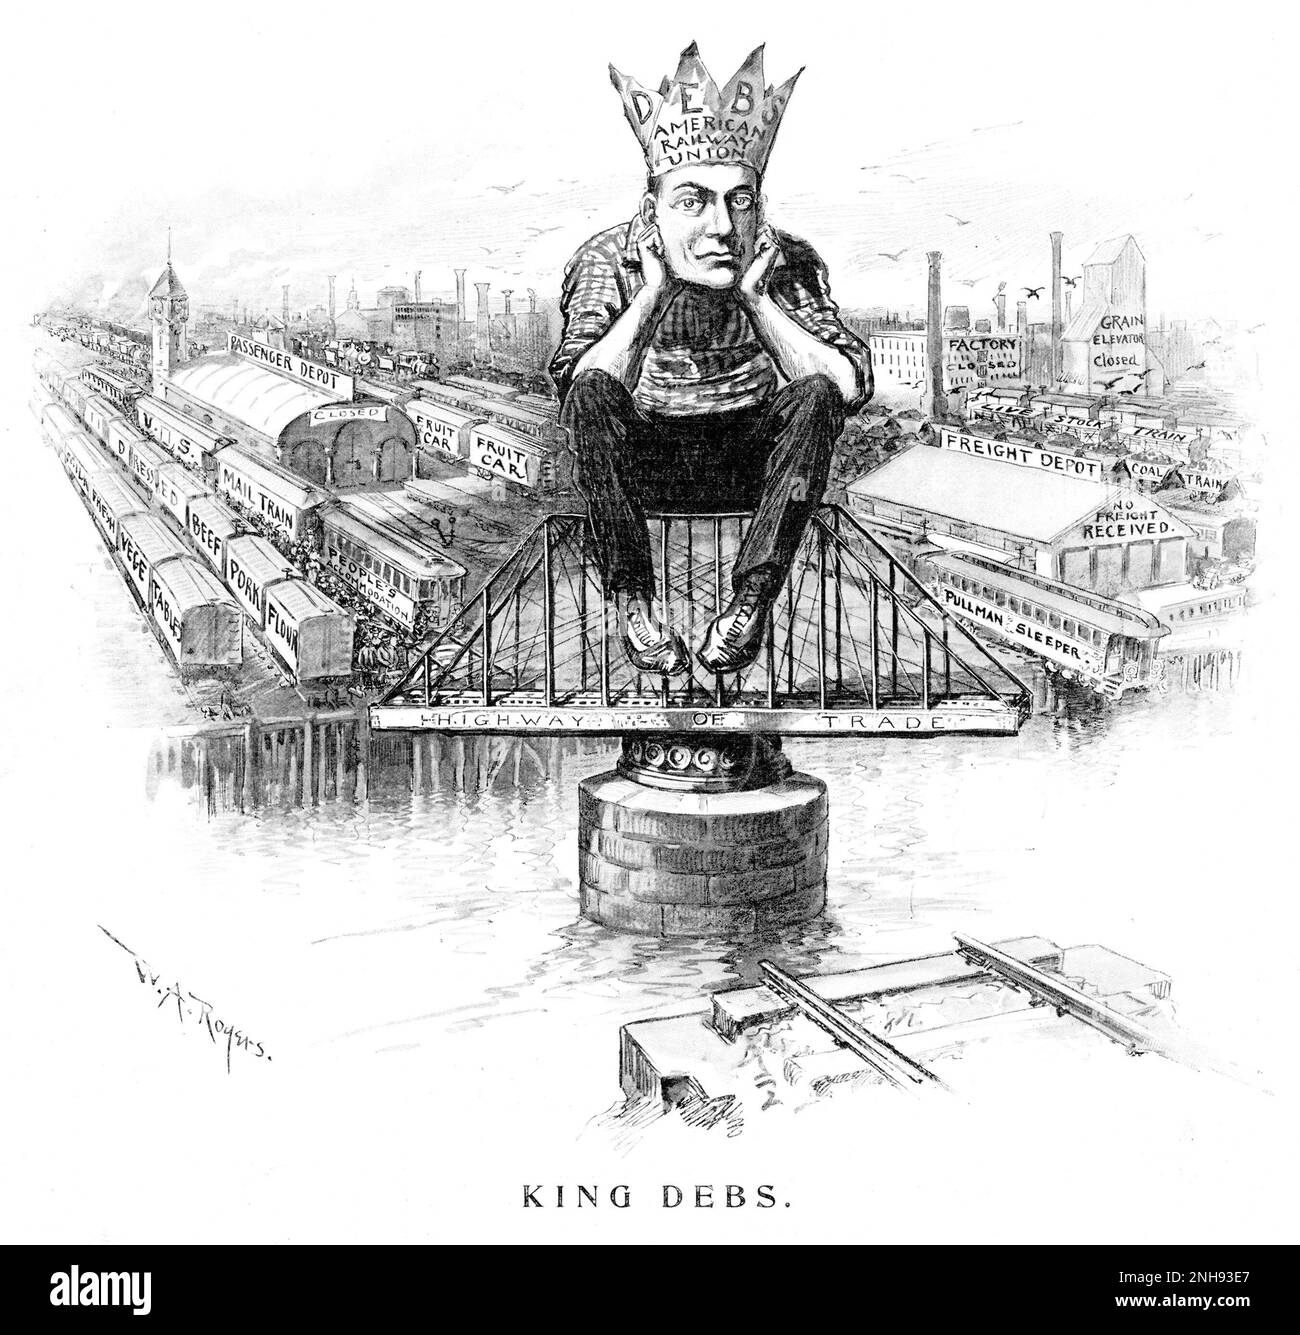 Cover cartoon of Harper's Weekly, July 14, 1894. Eugene V. Debs (1855-1926) was an American socialist, political activist, trade unionist, and one of the founding members of the Industrial Workers of the World (IWW). As president of the American Railway Union, he led a boycott against handling trains with Pullman cars in what became the nationwide Pullman Strike of 1894./nHe was criticized in the press for causing food shortages and passenger delays. /n Stock Photo